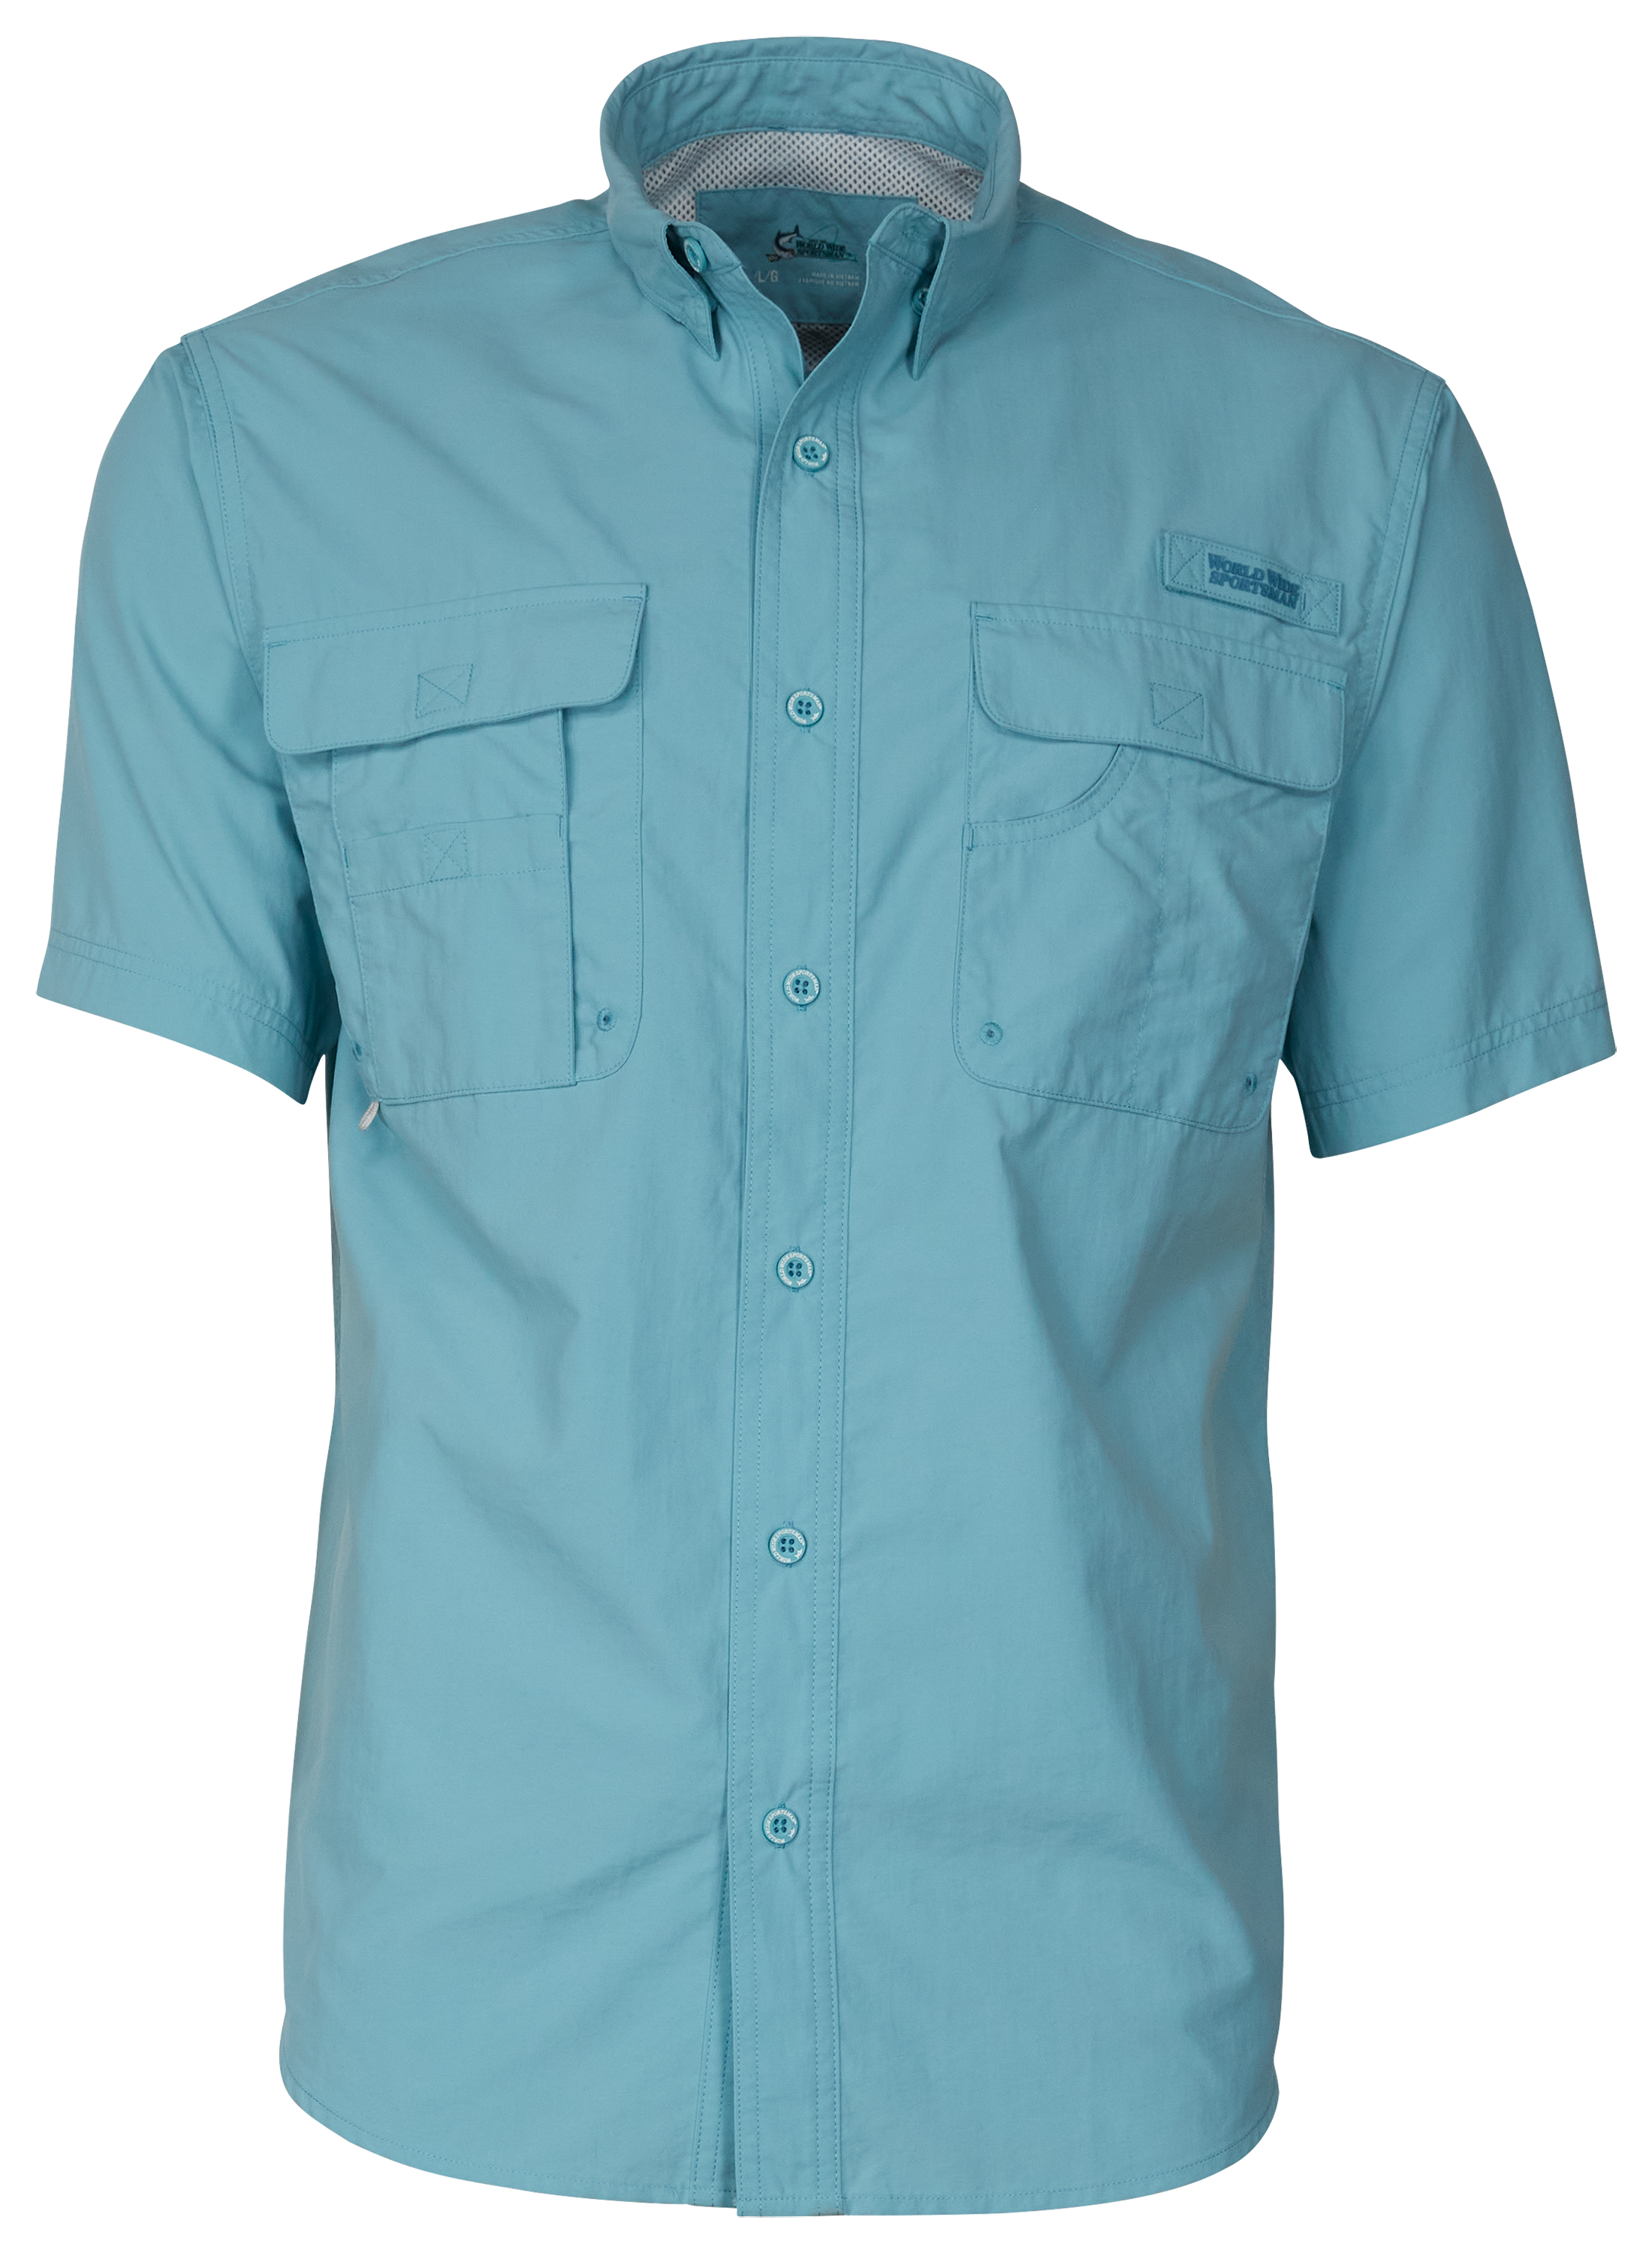 World Wide Sportsman Recycled-Nylon Angler 2.0 Short-Sleeve Button-Down Shirt for Men - Reef Waters - XL